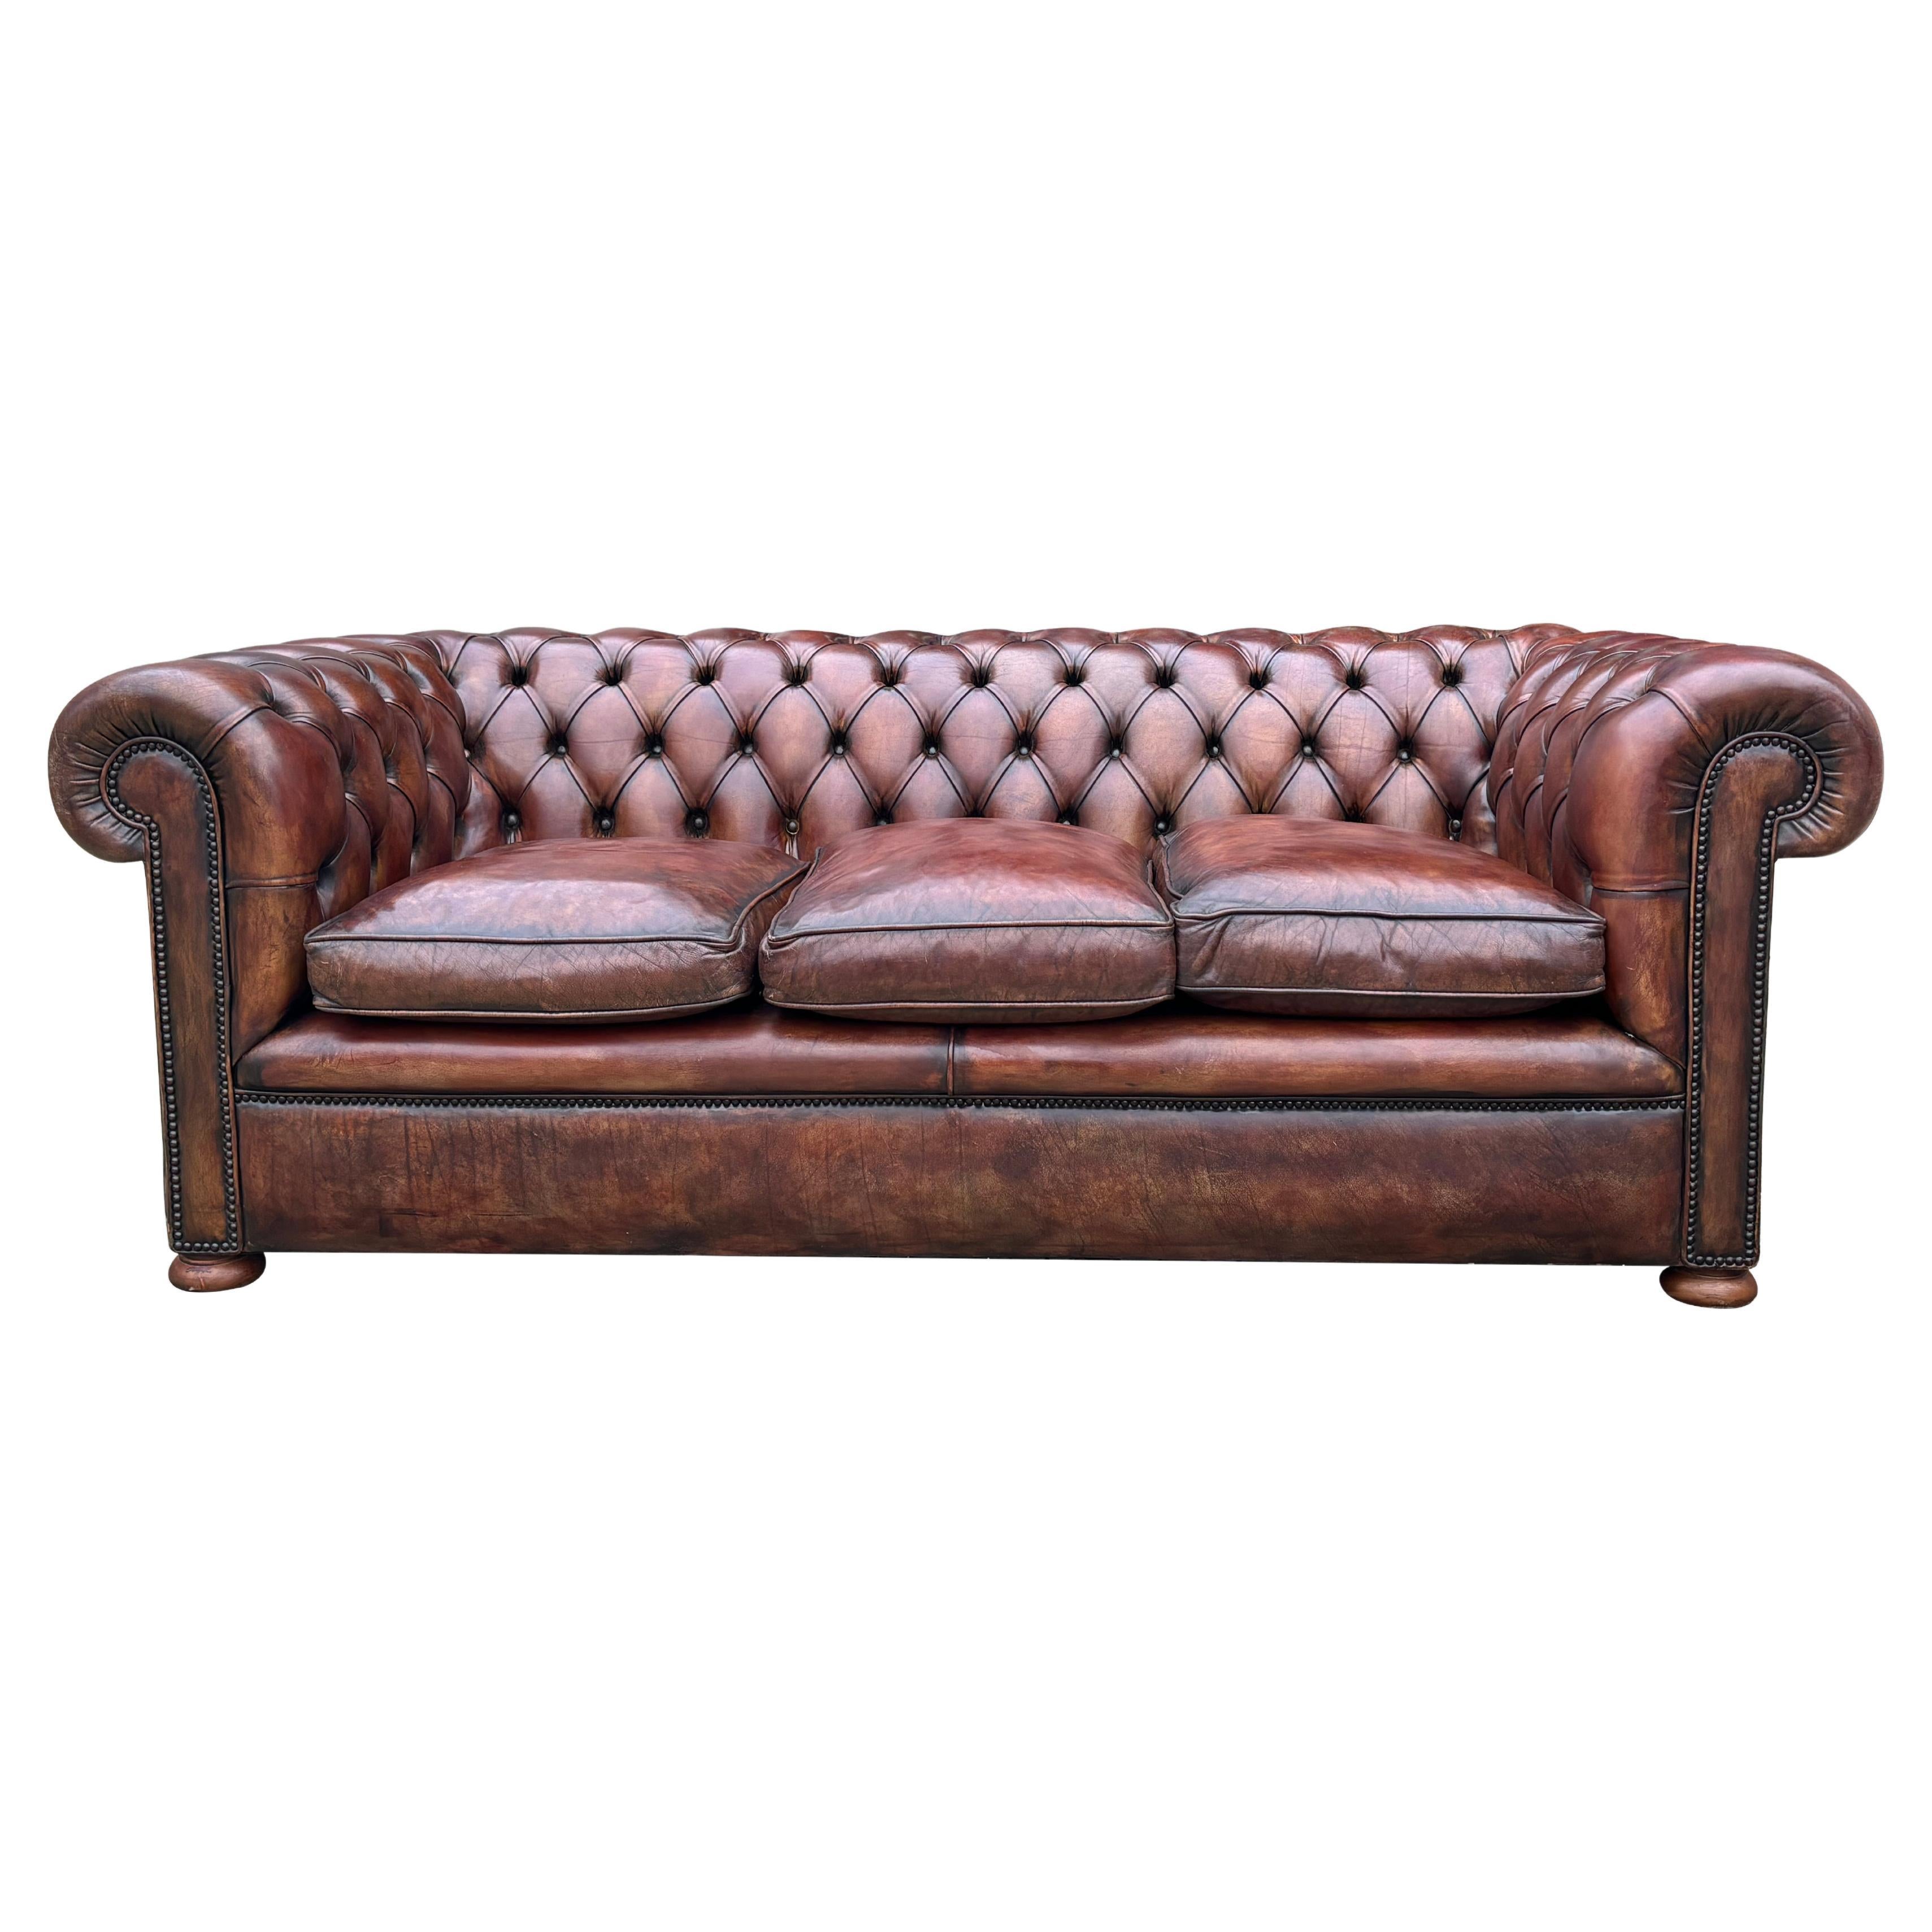 Stunning Quality 3 Seater Brown Leather Chesterfield Sofa